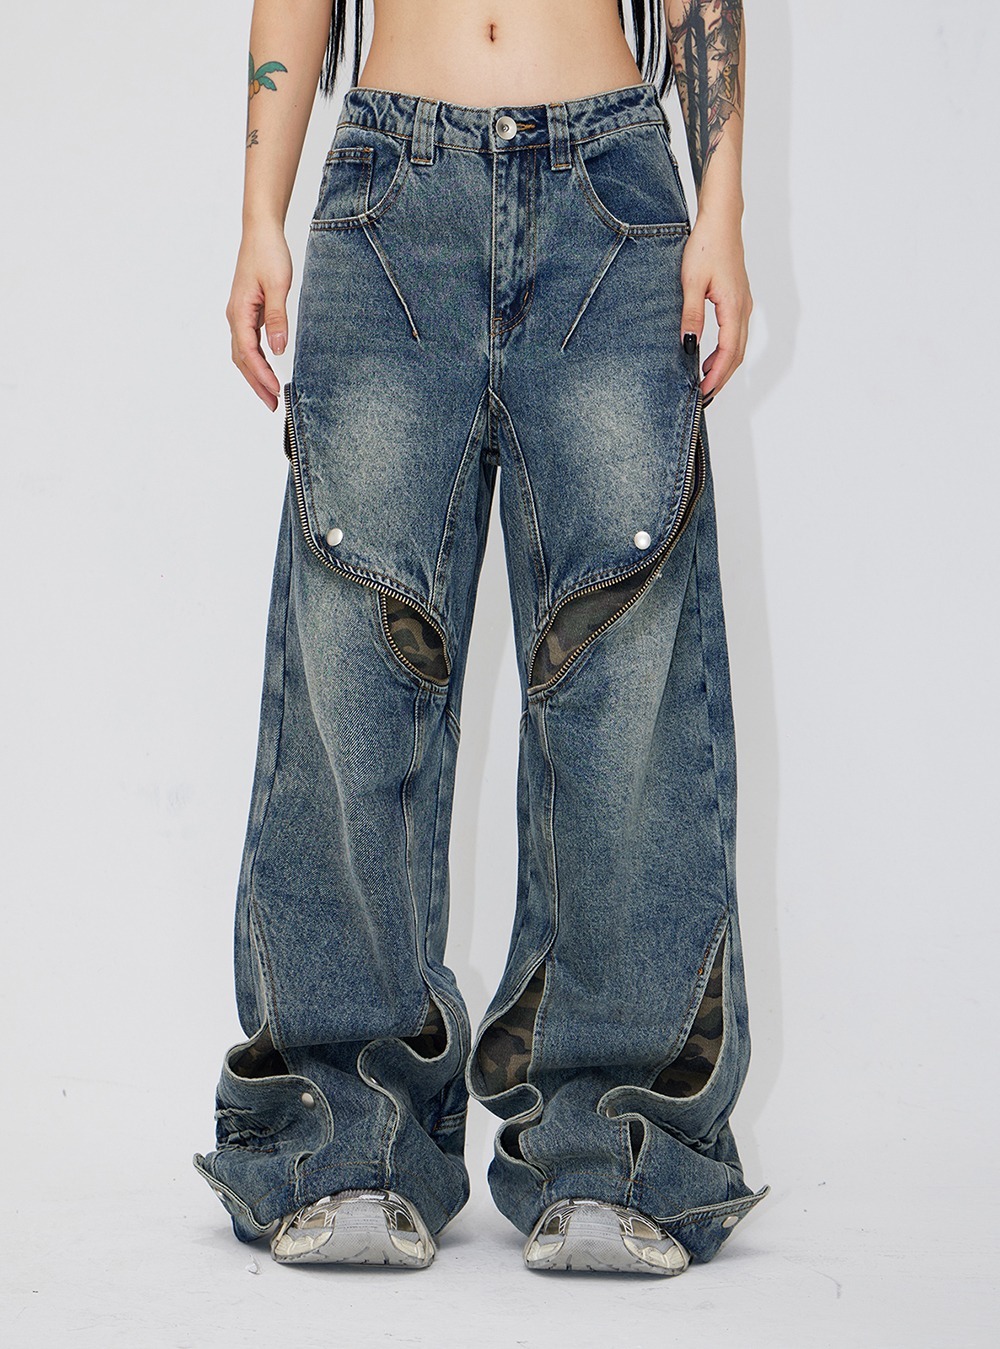 [PEOPLESTYLE] Destroyed camouflage splicing denim pants